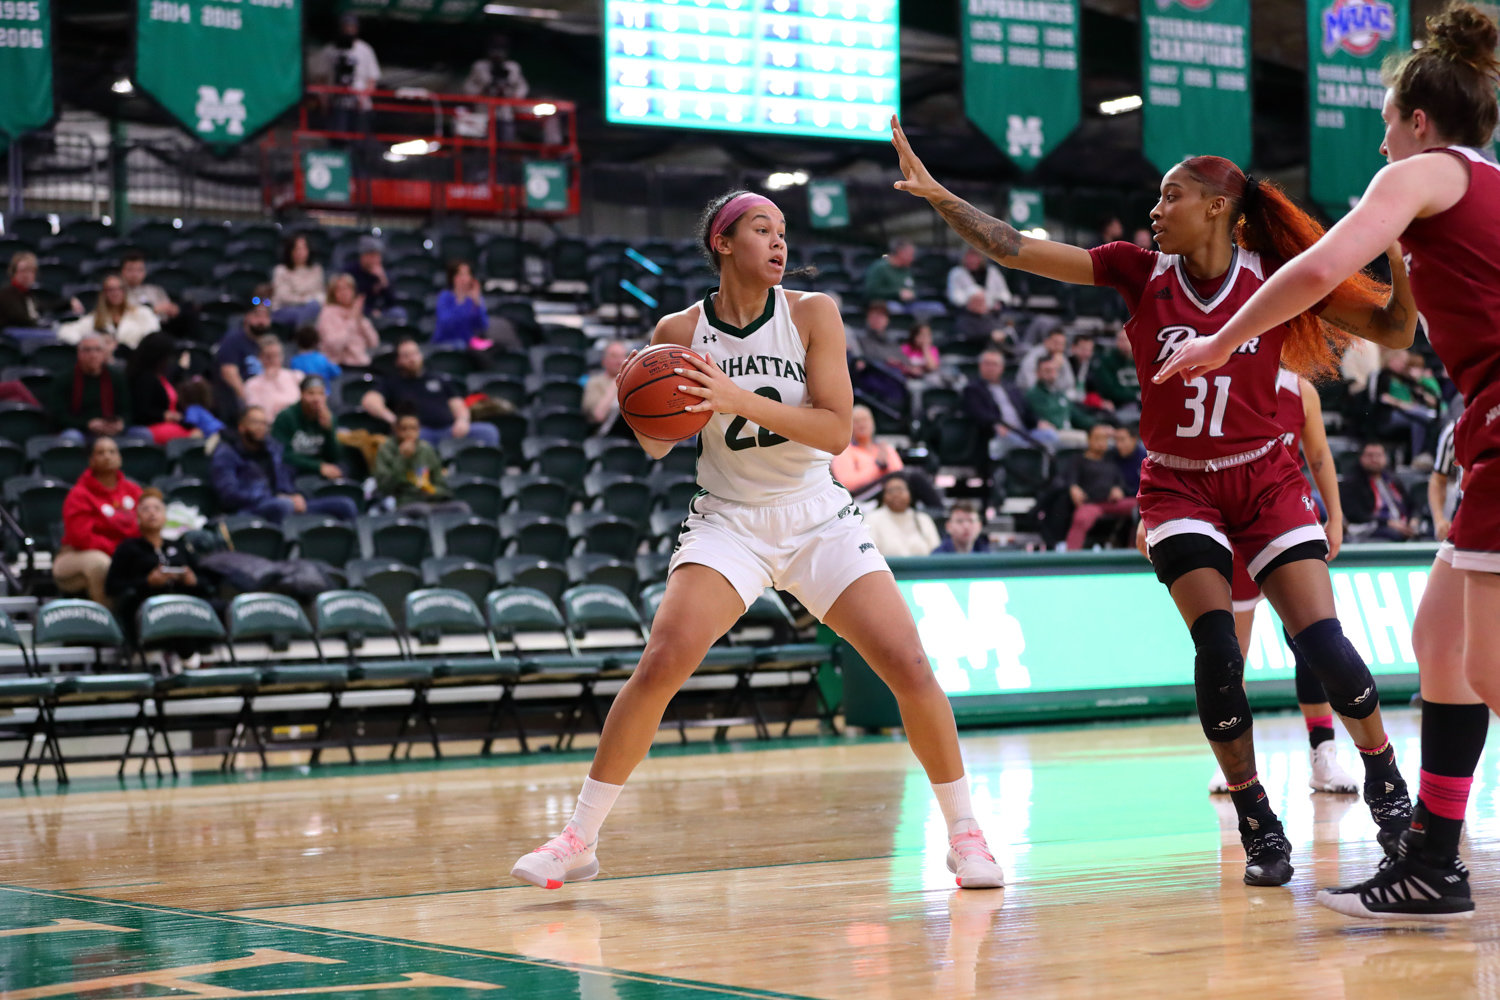 Manhattan junior Courtney Warley turned in a dominant performance against Monmouth last week, logging a double-double with 17 points and 10 rebounds in the Jaspers’ victory over the Hawks.